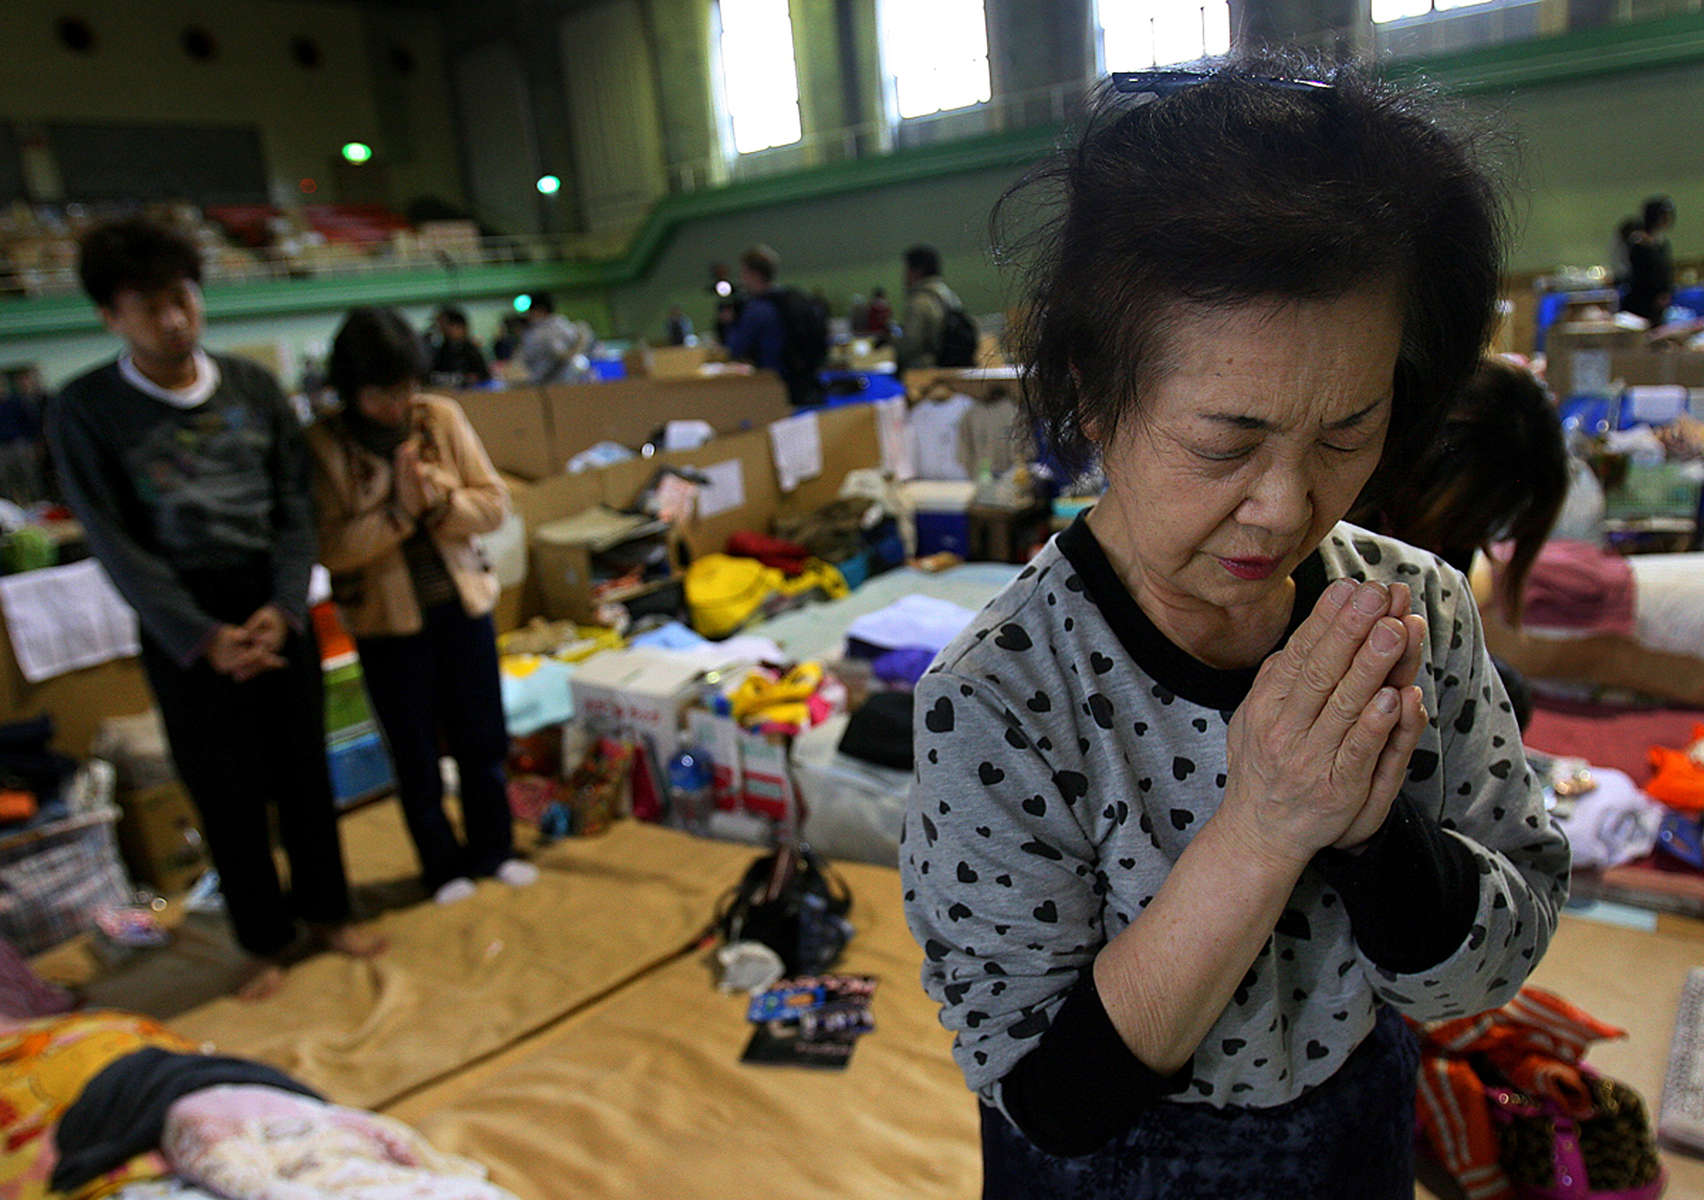 Kimiko Daigaku, 68, prays during a moment of silenceat the Wakabayashi Gym in Sendai on the one month anniversity of the earthquake and tsunami that hit Japan at 2:46 p.m. March 11, 2011. She is one of 320 evacuees living in the gym since their homes were destroyed in a 9.0 earthquake and tsunami. (The Press-Enterprise/ Mark Zaleski)